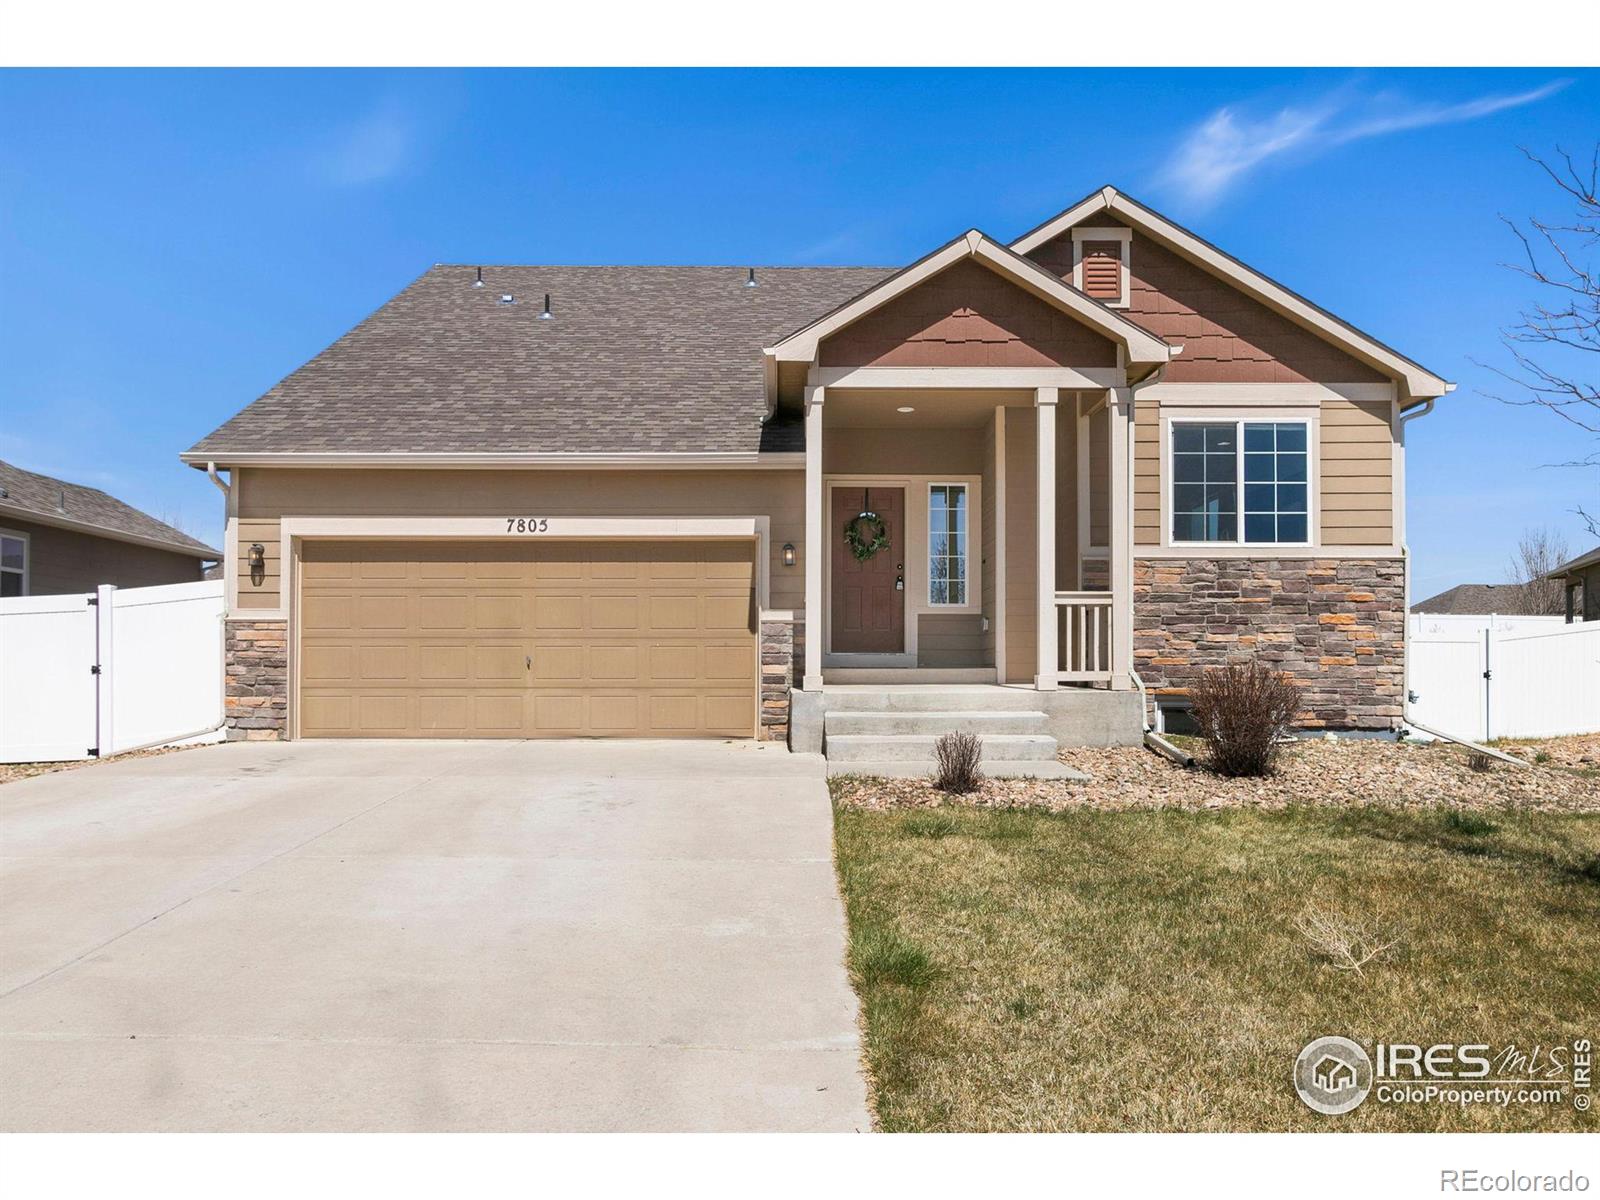 7805 W 11th St Rd, greeley MLS: 4567891007002 Beds: 3 Baths: 3 Price: $435,000